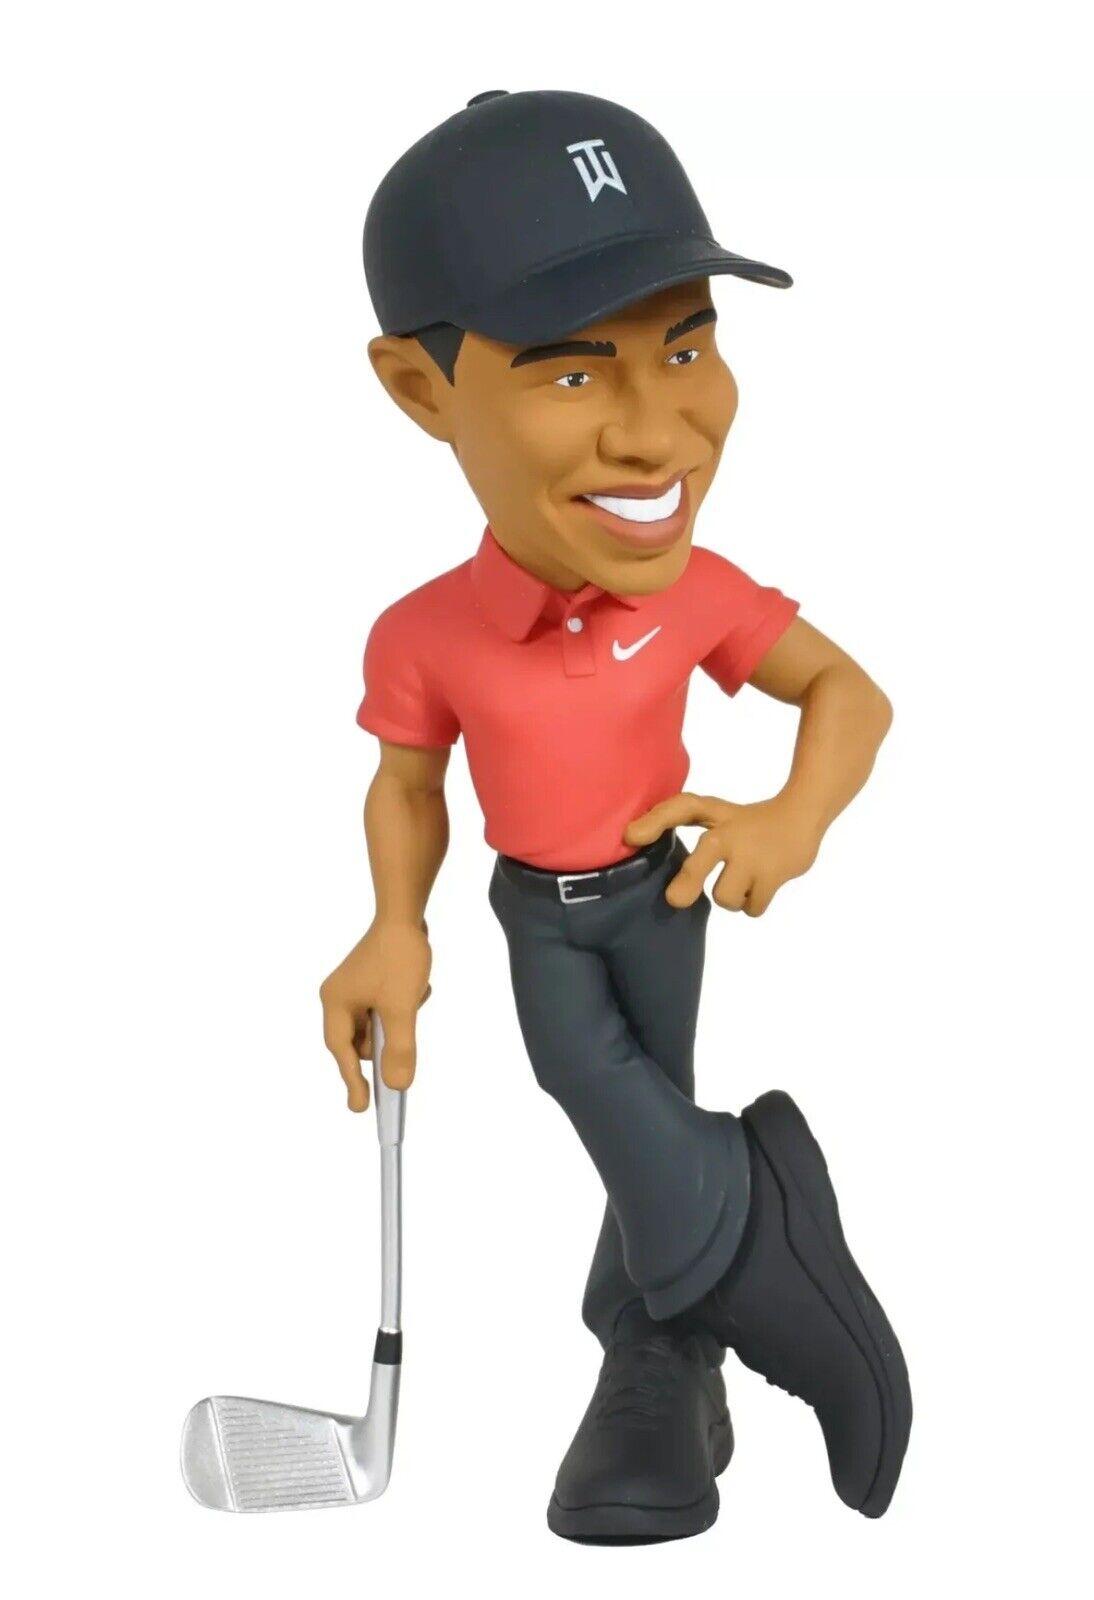 Tiger Woods smALL-Stars Collectible Figure, NEW Upper Deck Sunday Red Nike Shirt